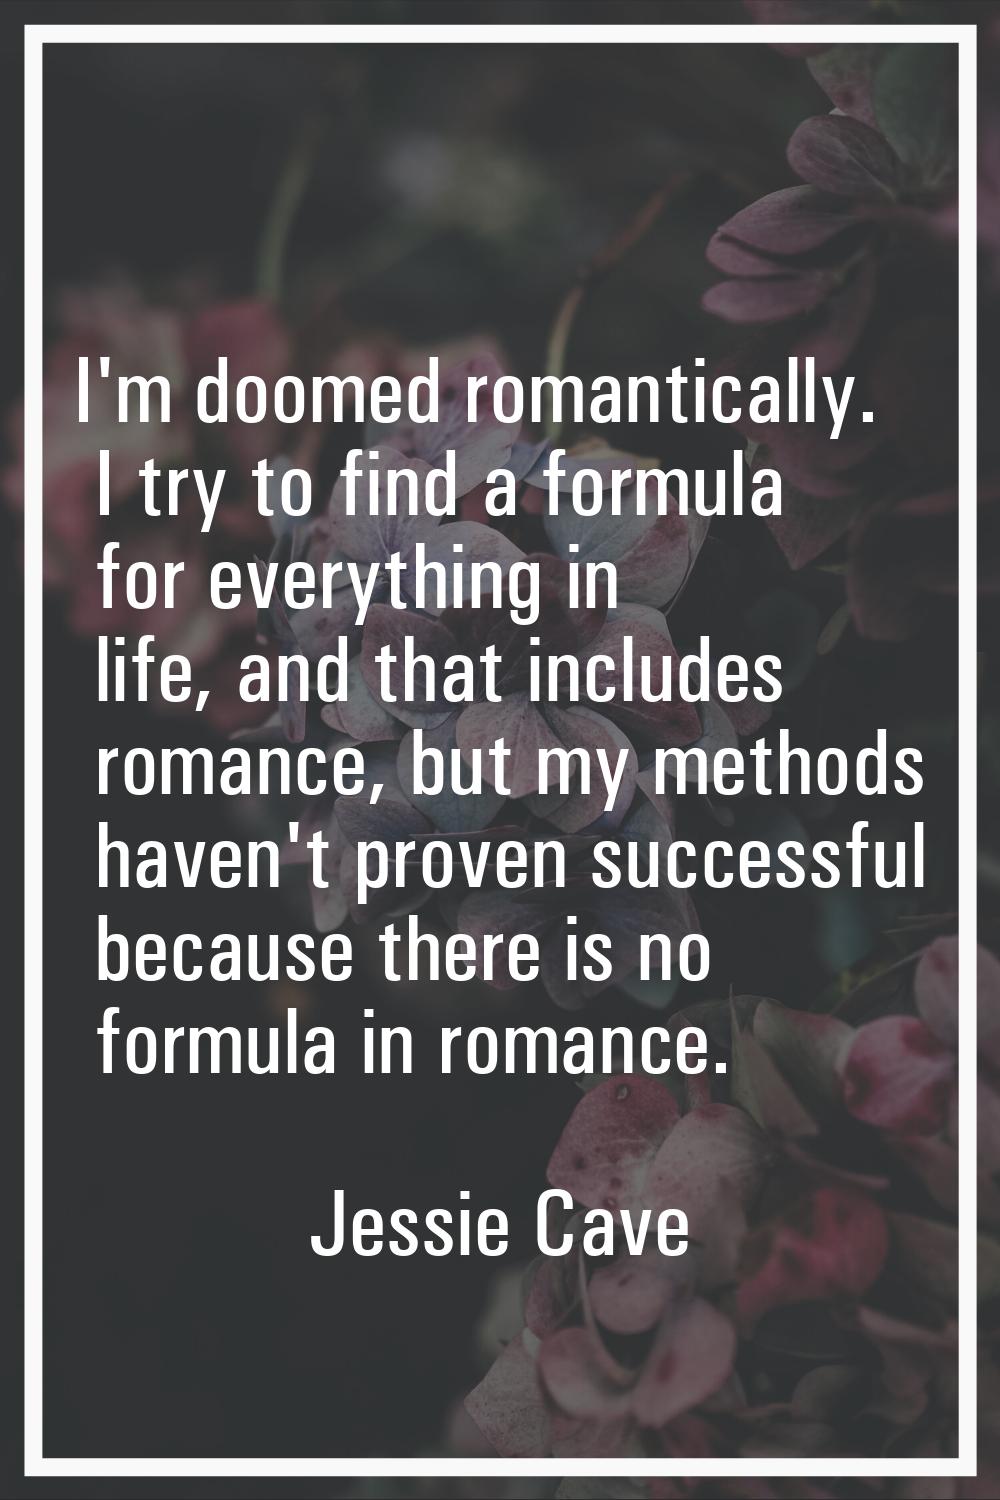 I'm doomed romantically. I try to find a formula for everything in life, and that includes romance,